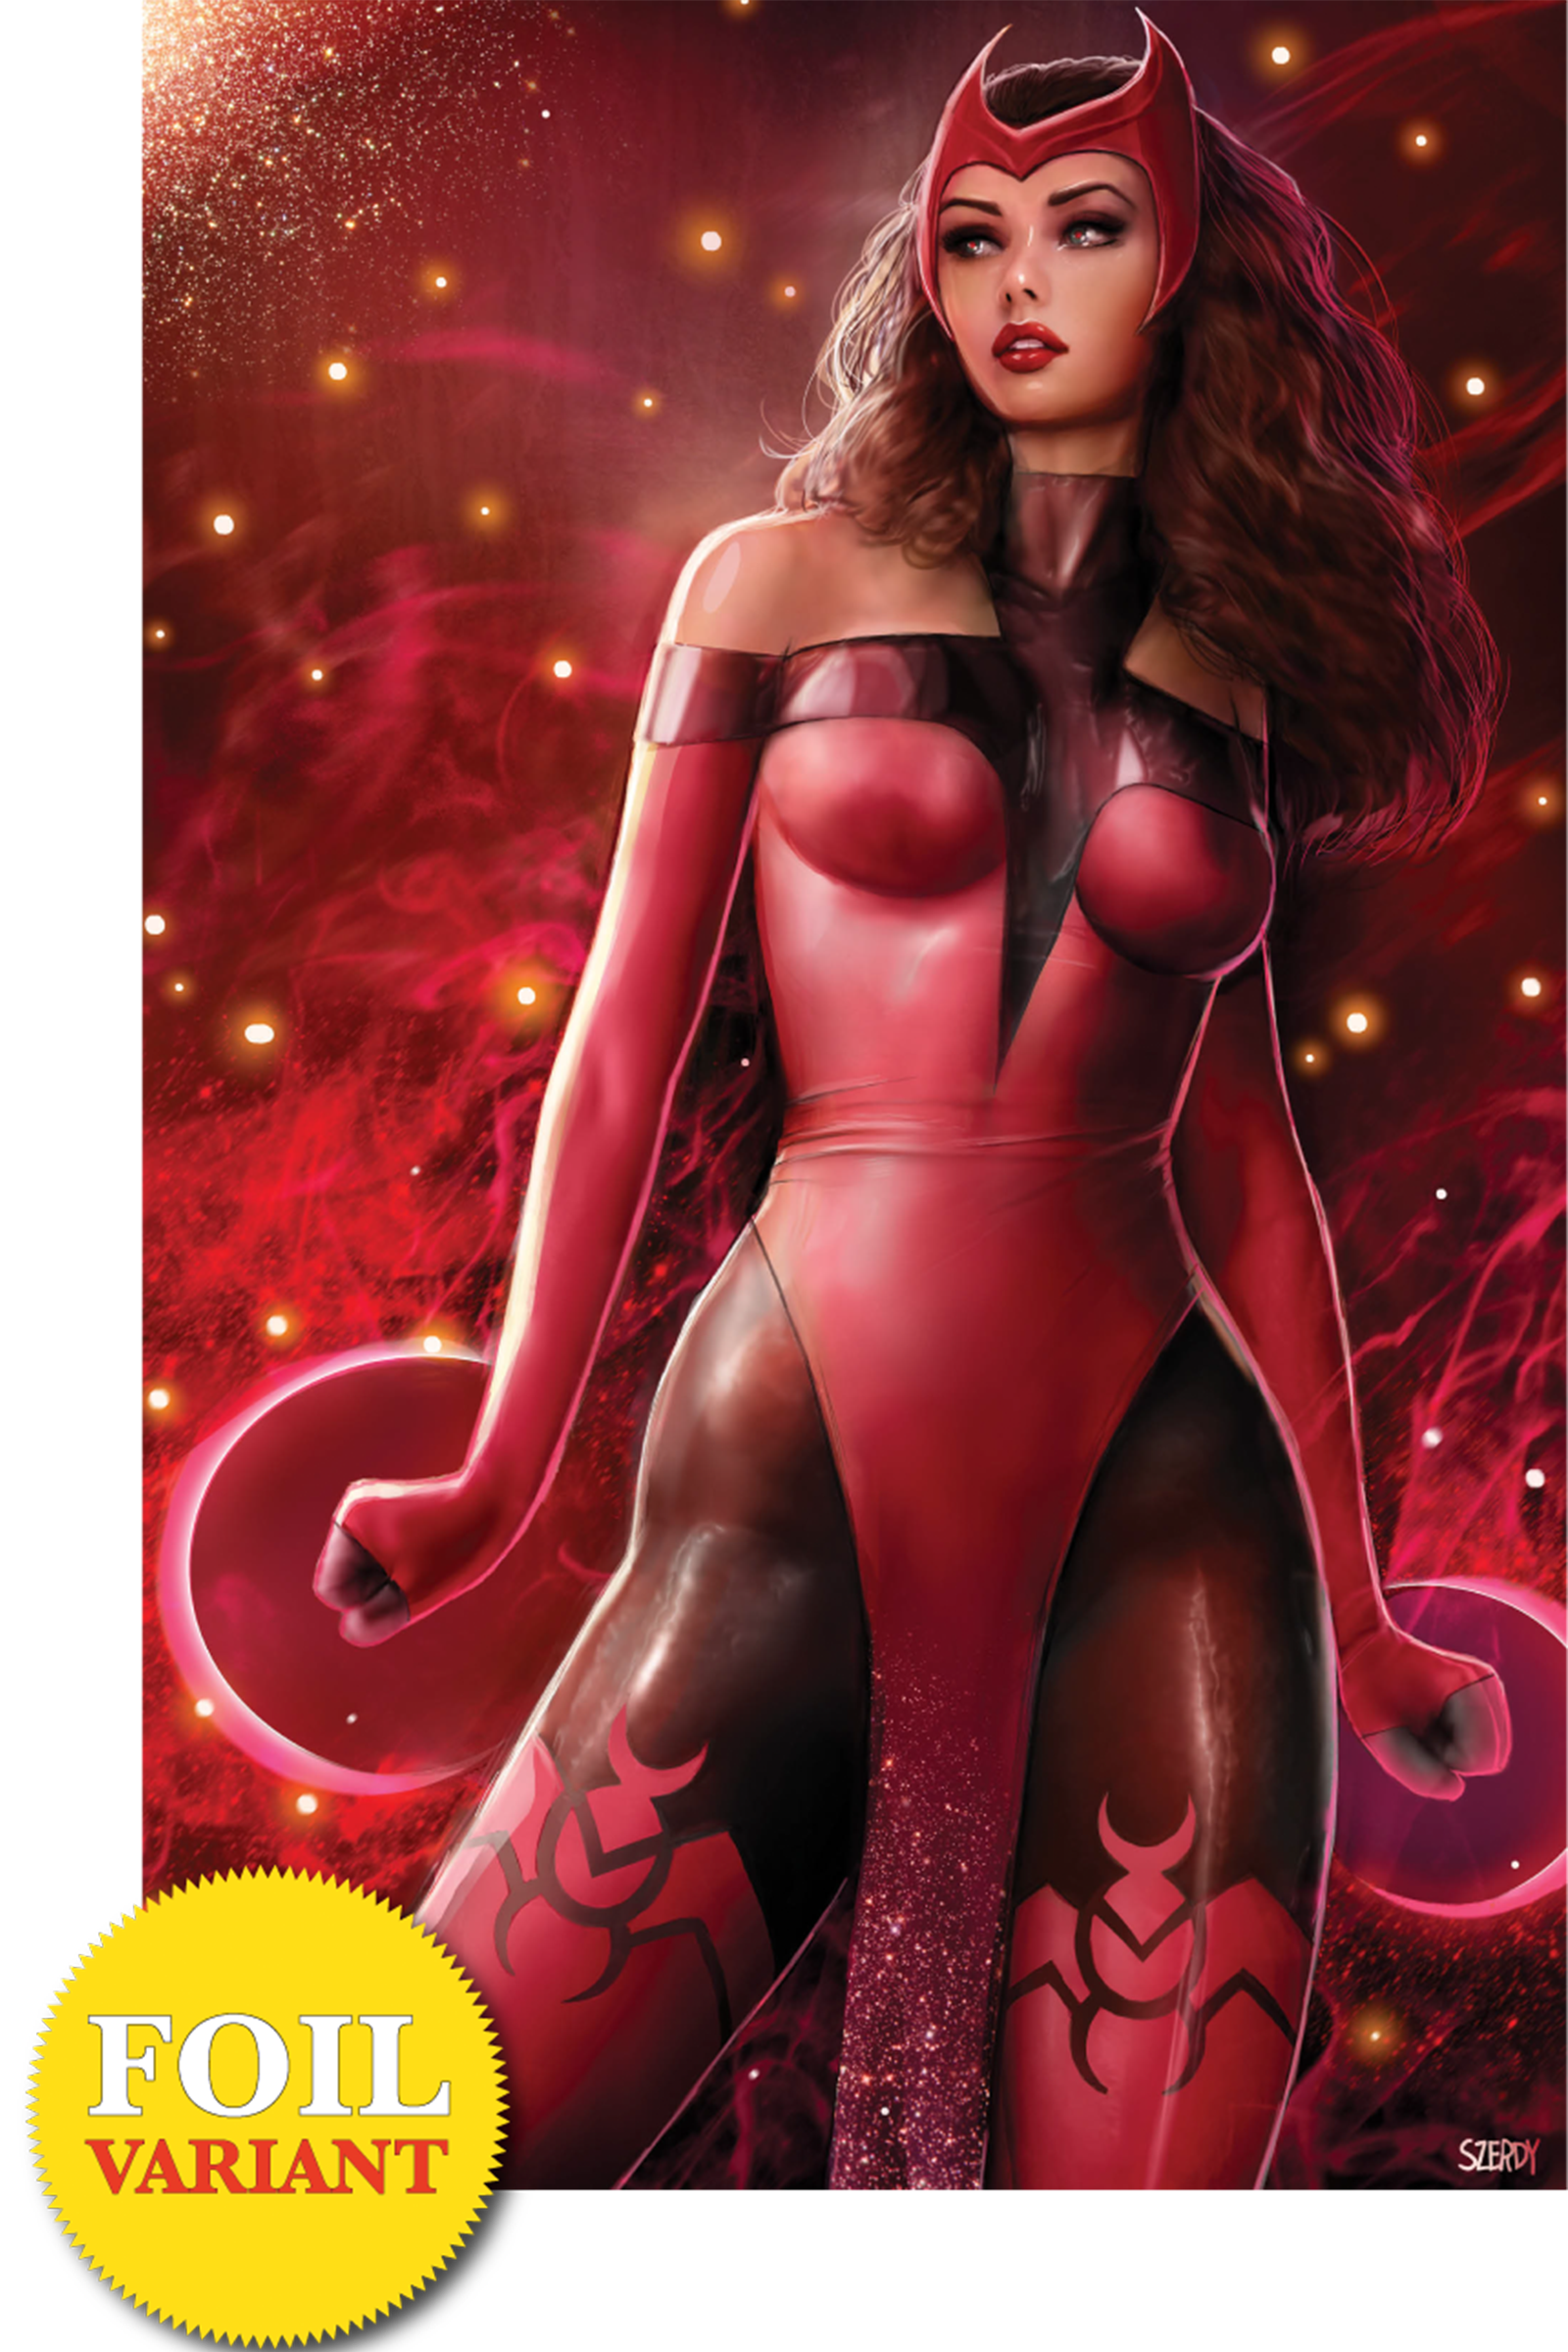 SCARLET WITCH #4 UNKNOWN COMICS DAVID NAKAYAMA EXCLUSIVE FOIL VIRGIN COLOR  BLEED VAR (04/05/2023)